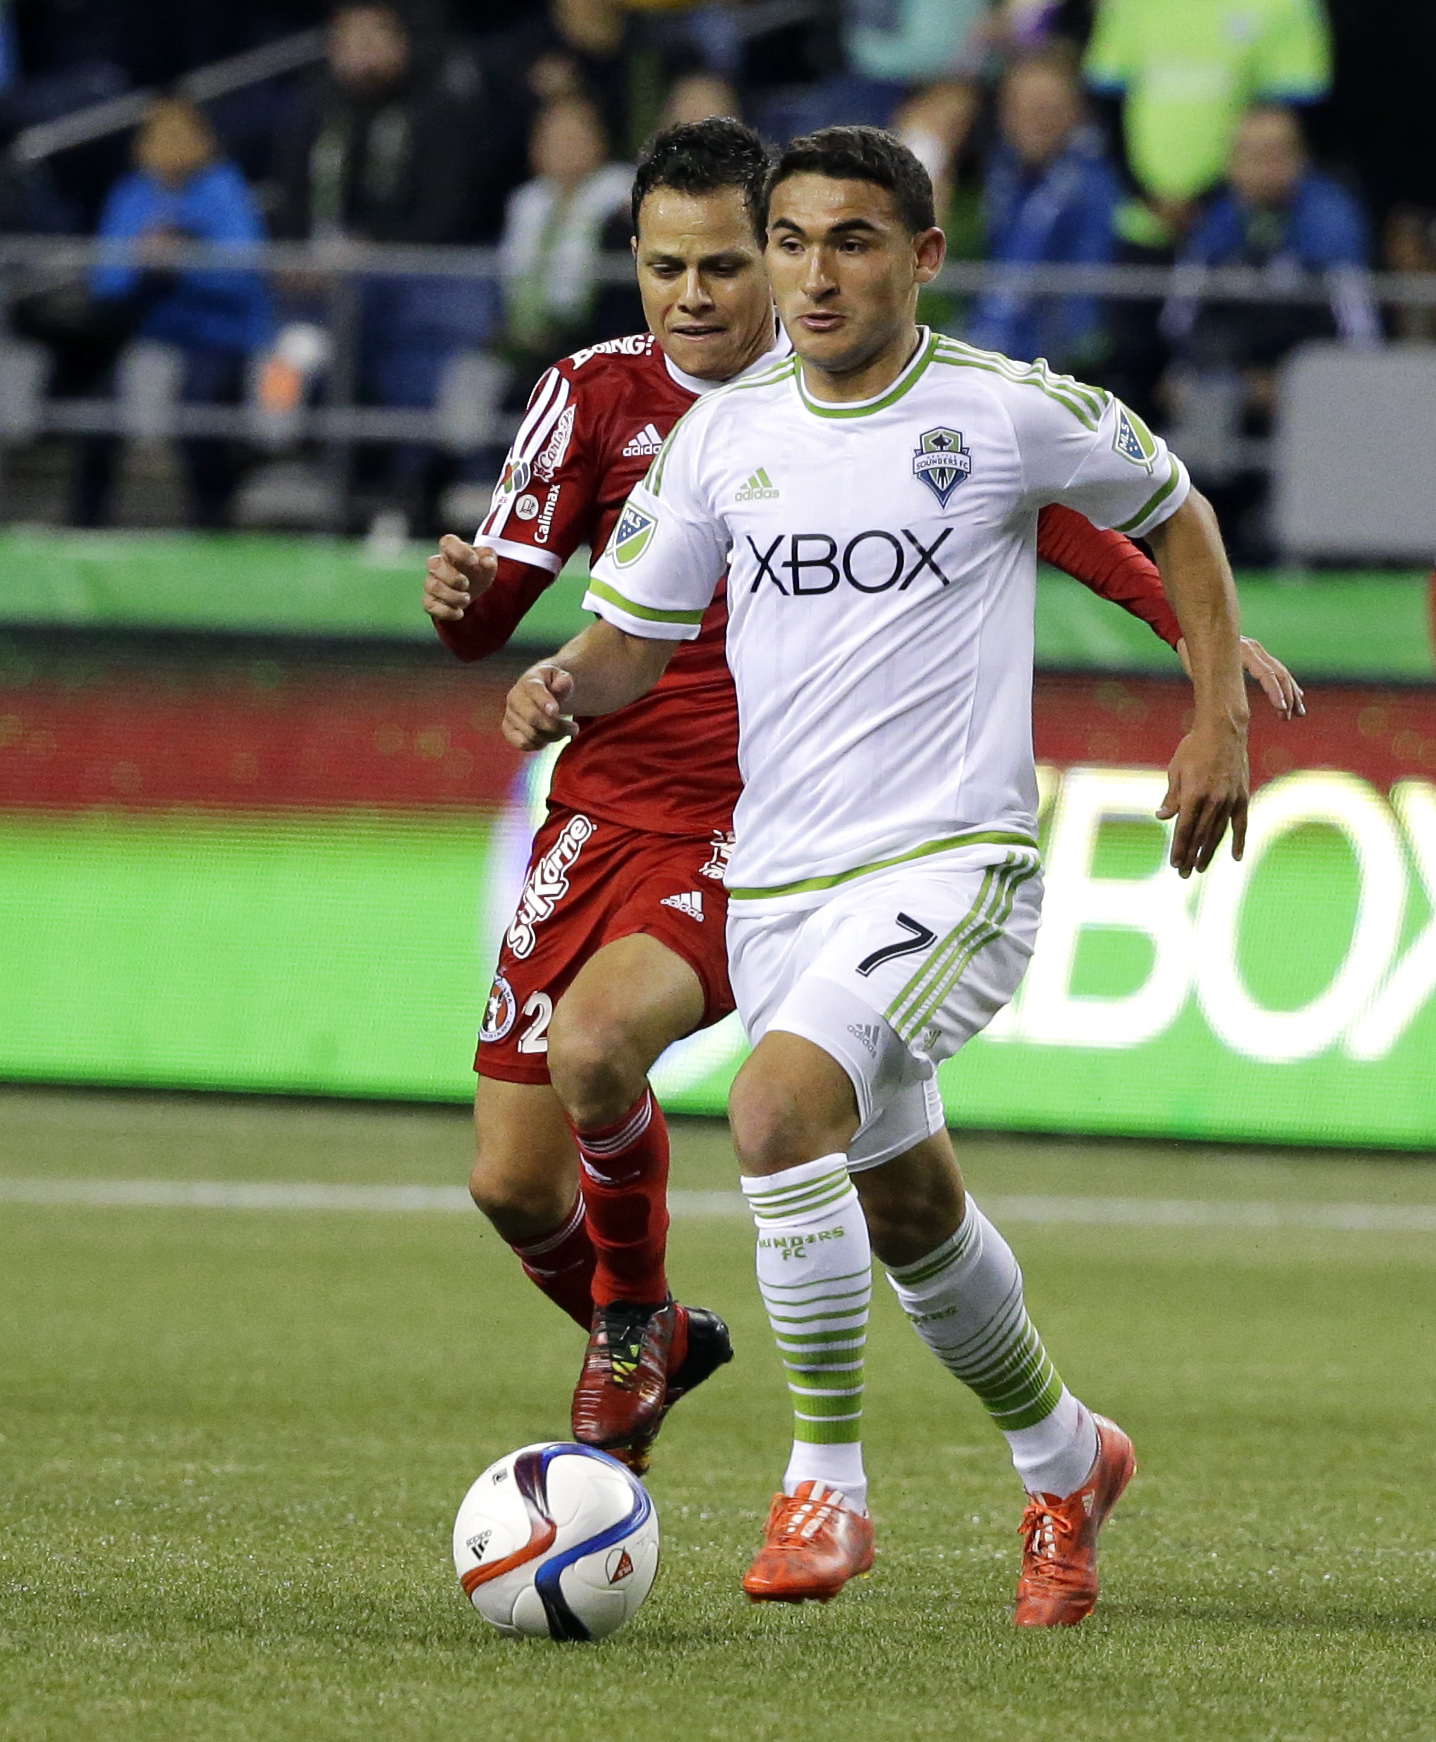 Seattle Sounders' Cristian Roldan, right, dribbles the ball away from Club Tijuana's Juan Carlos Nunez during the second half of an international friendly soccer match, Tuesday, March 24, 2015, in Seattle. The match ended in a 2-2 tie. (AP Photo/Ted S. Warren)